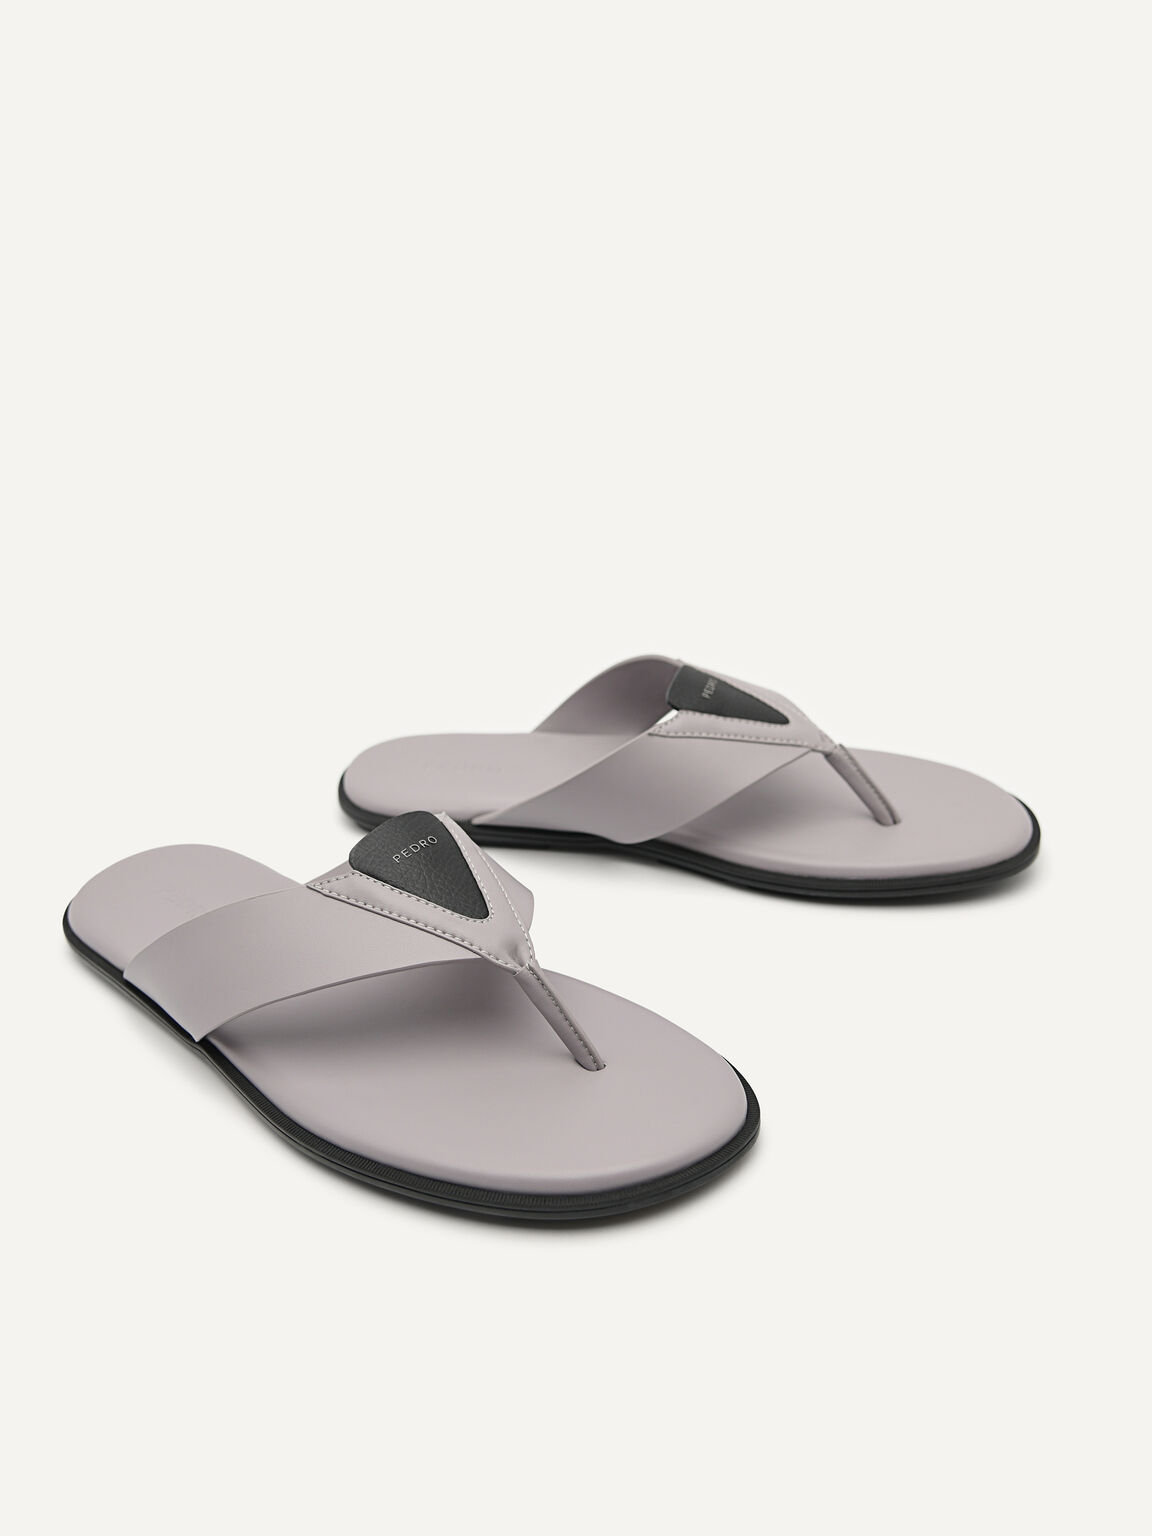 Synthetic Leather Thong Sandals, Grey